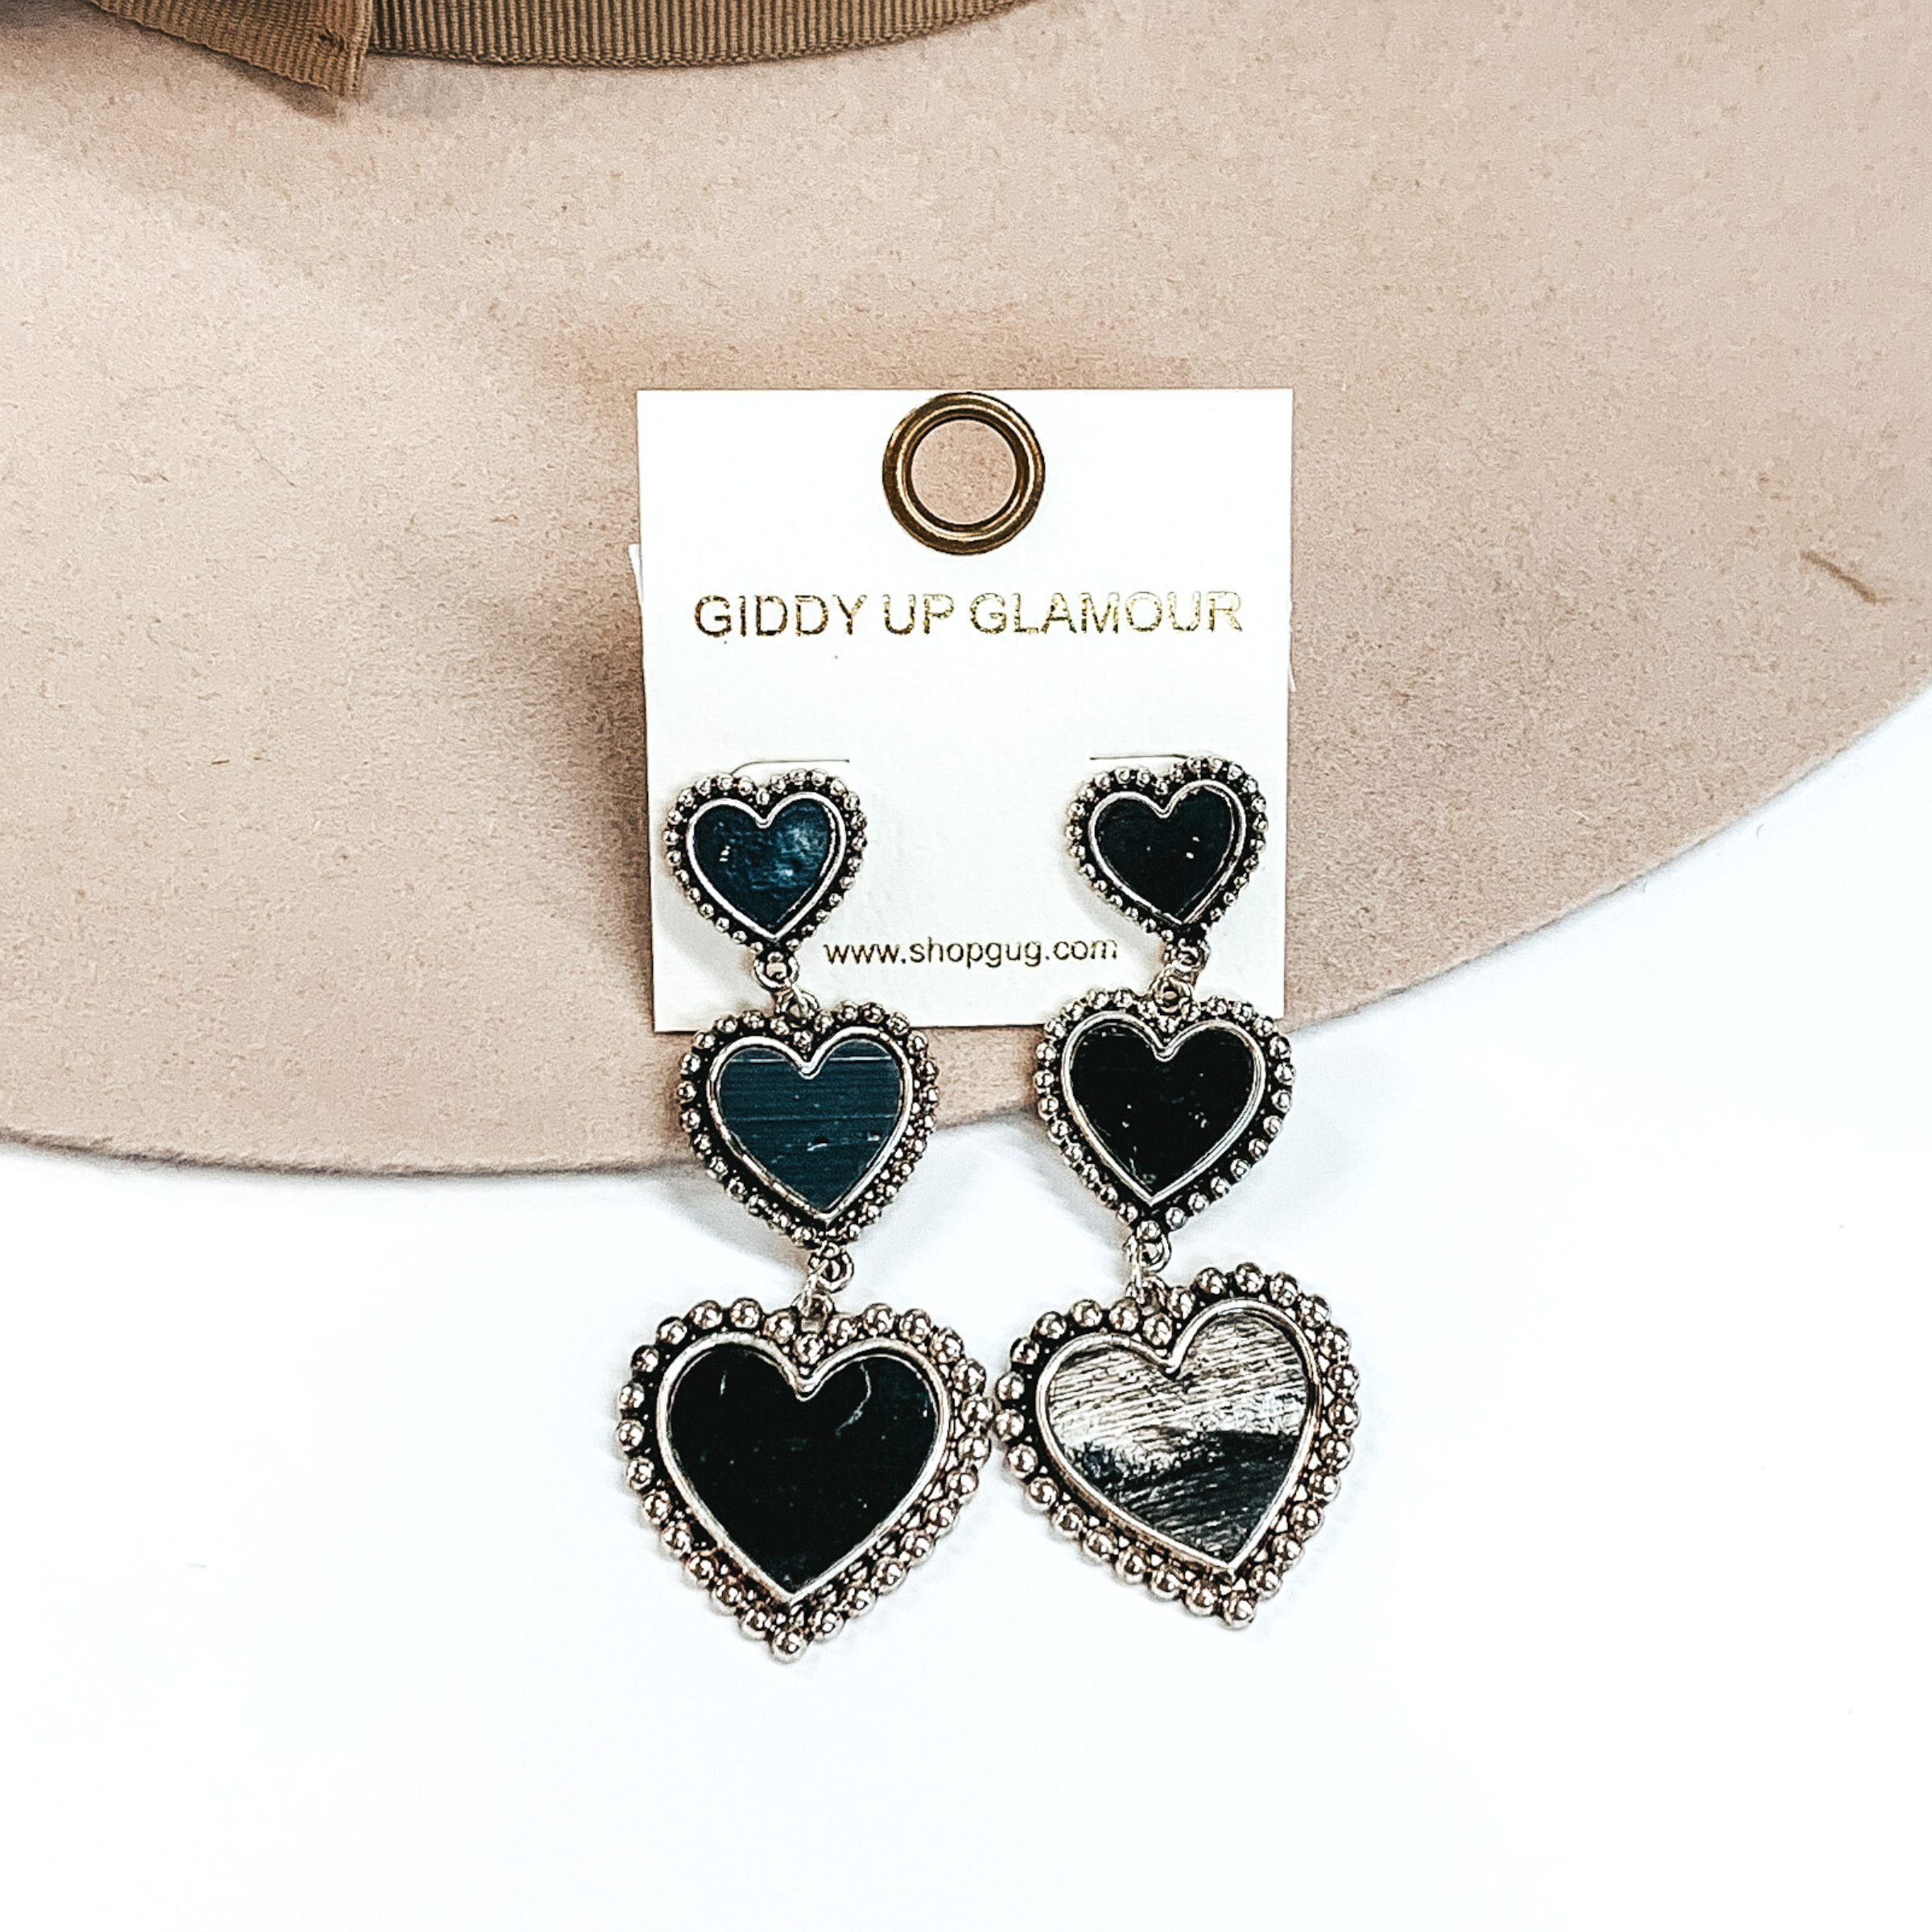 Three tiered heart drop earrings with hearts going from smallest to largest. These earrings have a silver outline with a black shell inlay. These earrings are pictured on a white and beige background.